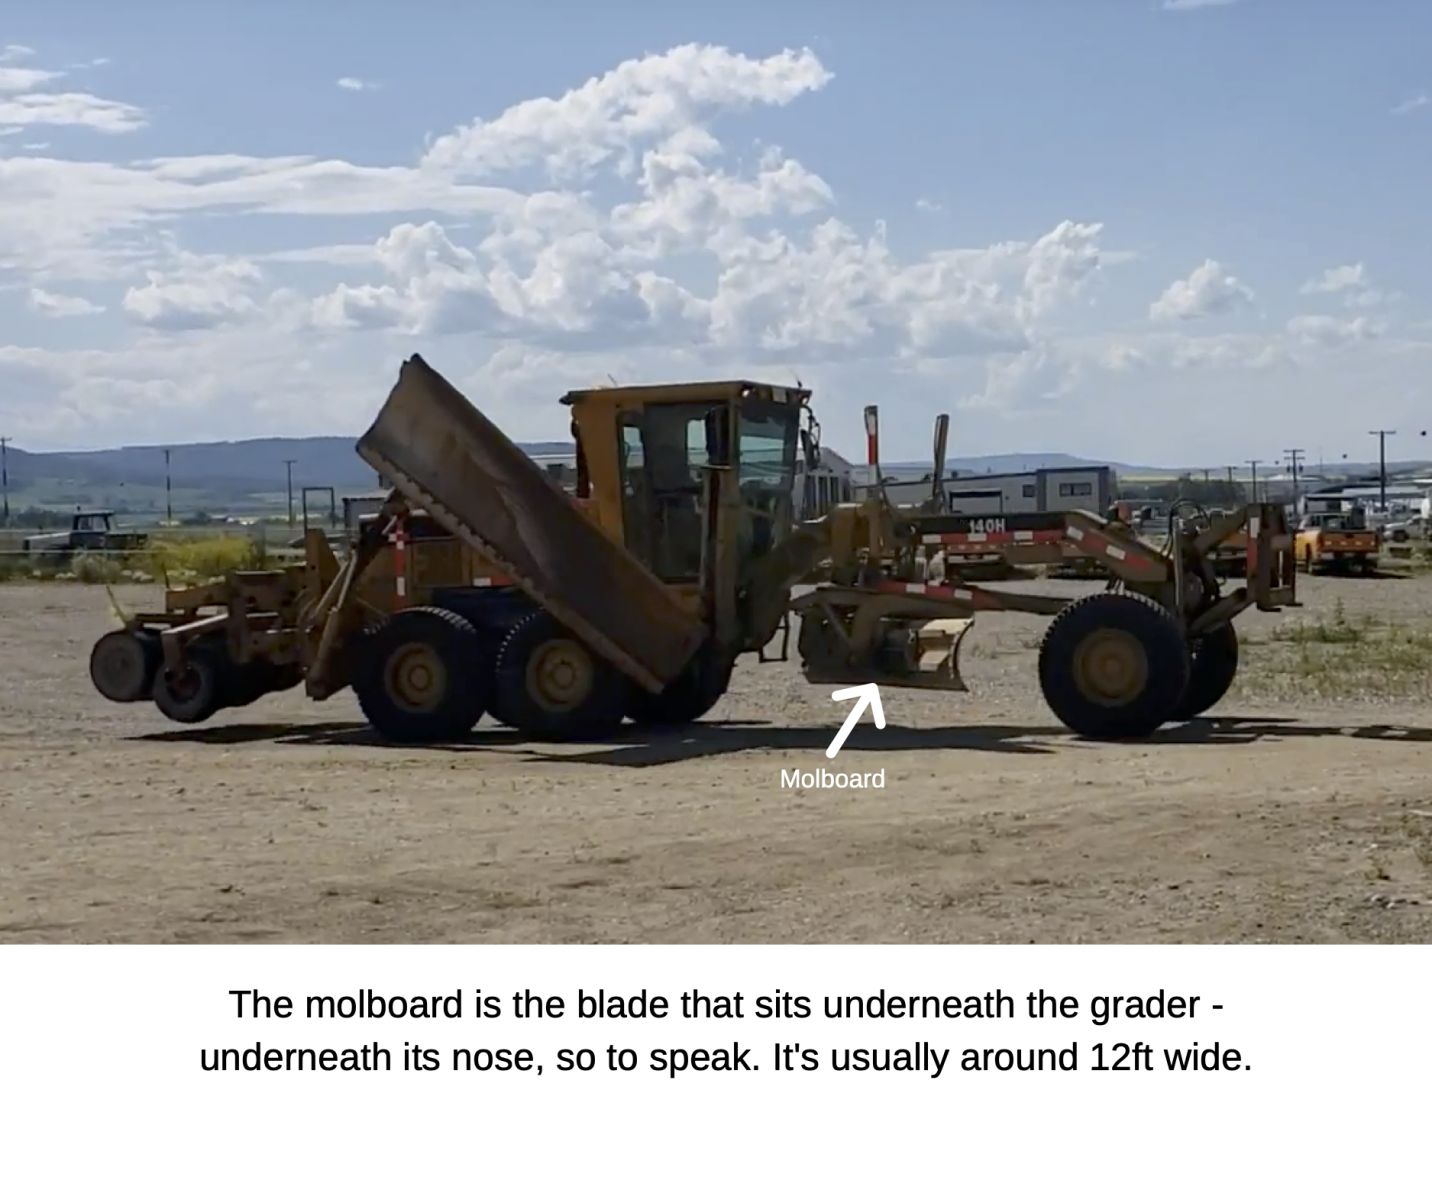 The molboard is the blade that sits underneath the grader - underneath its nose, so to speak. It's usually around 12ft wide.